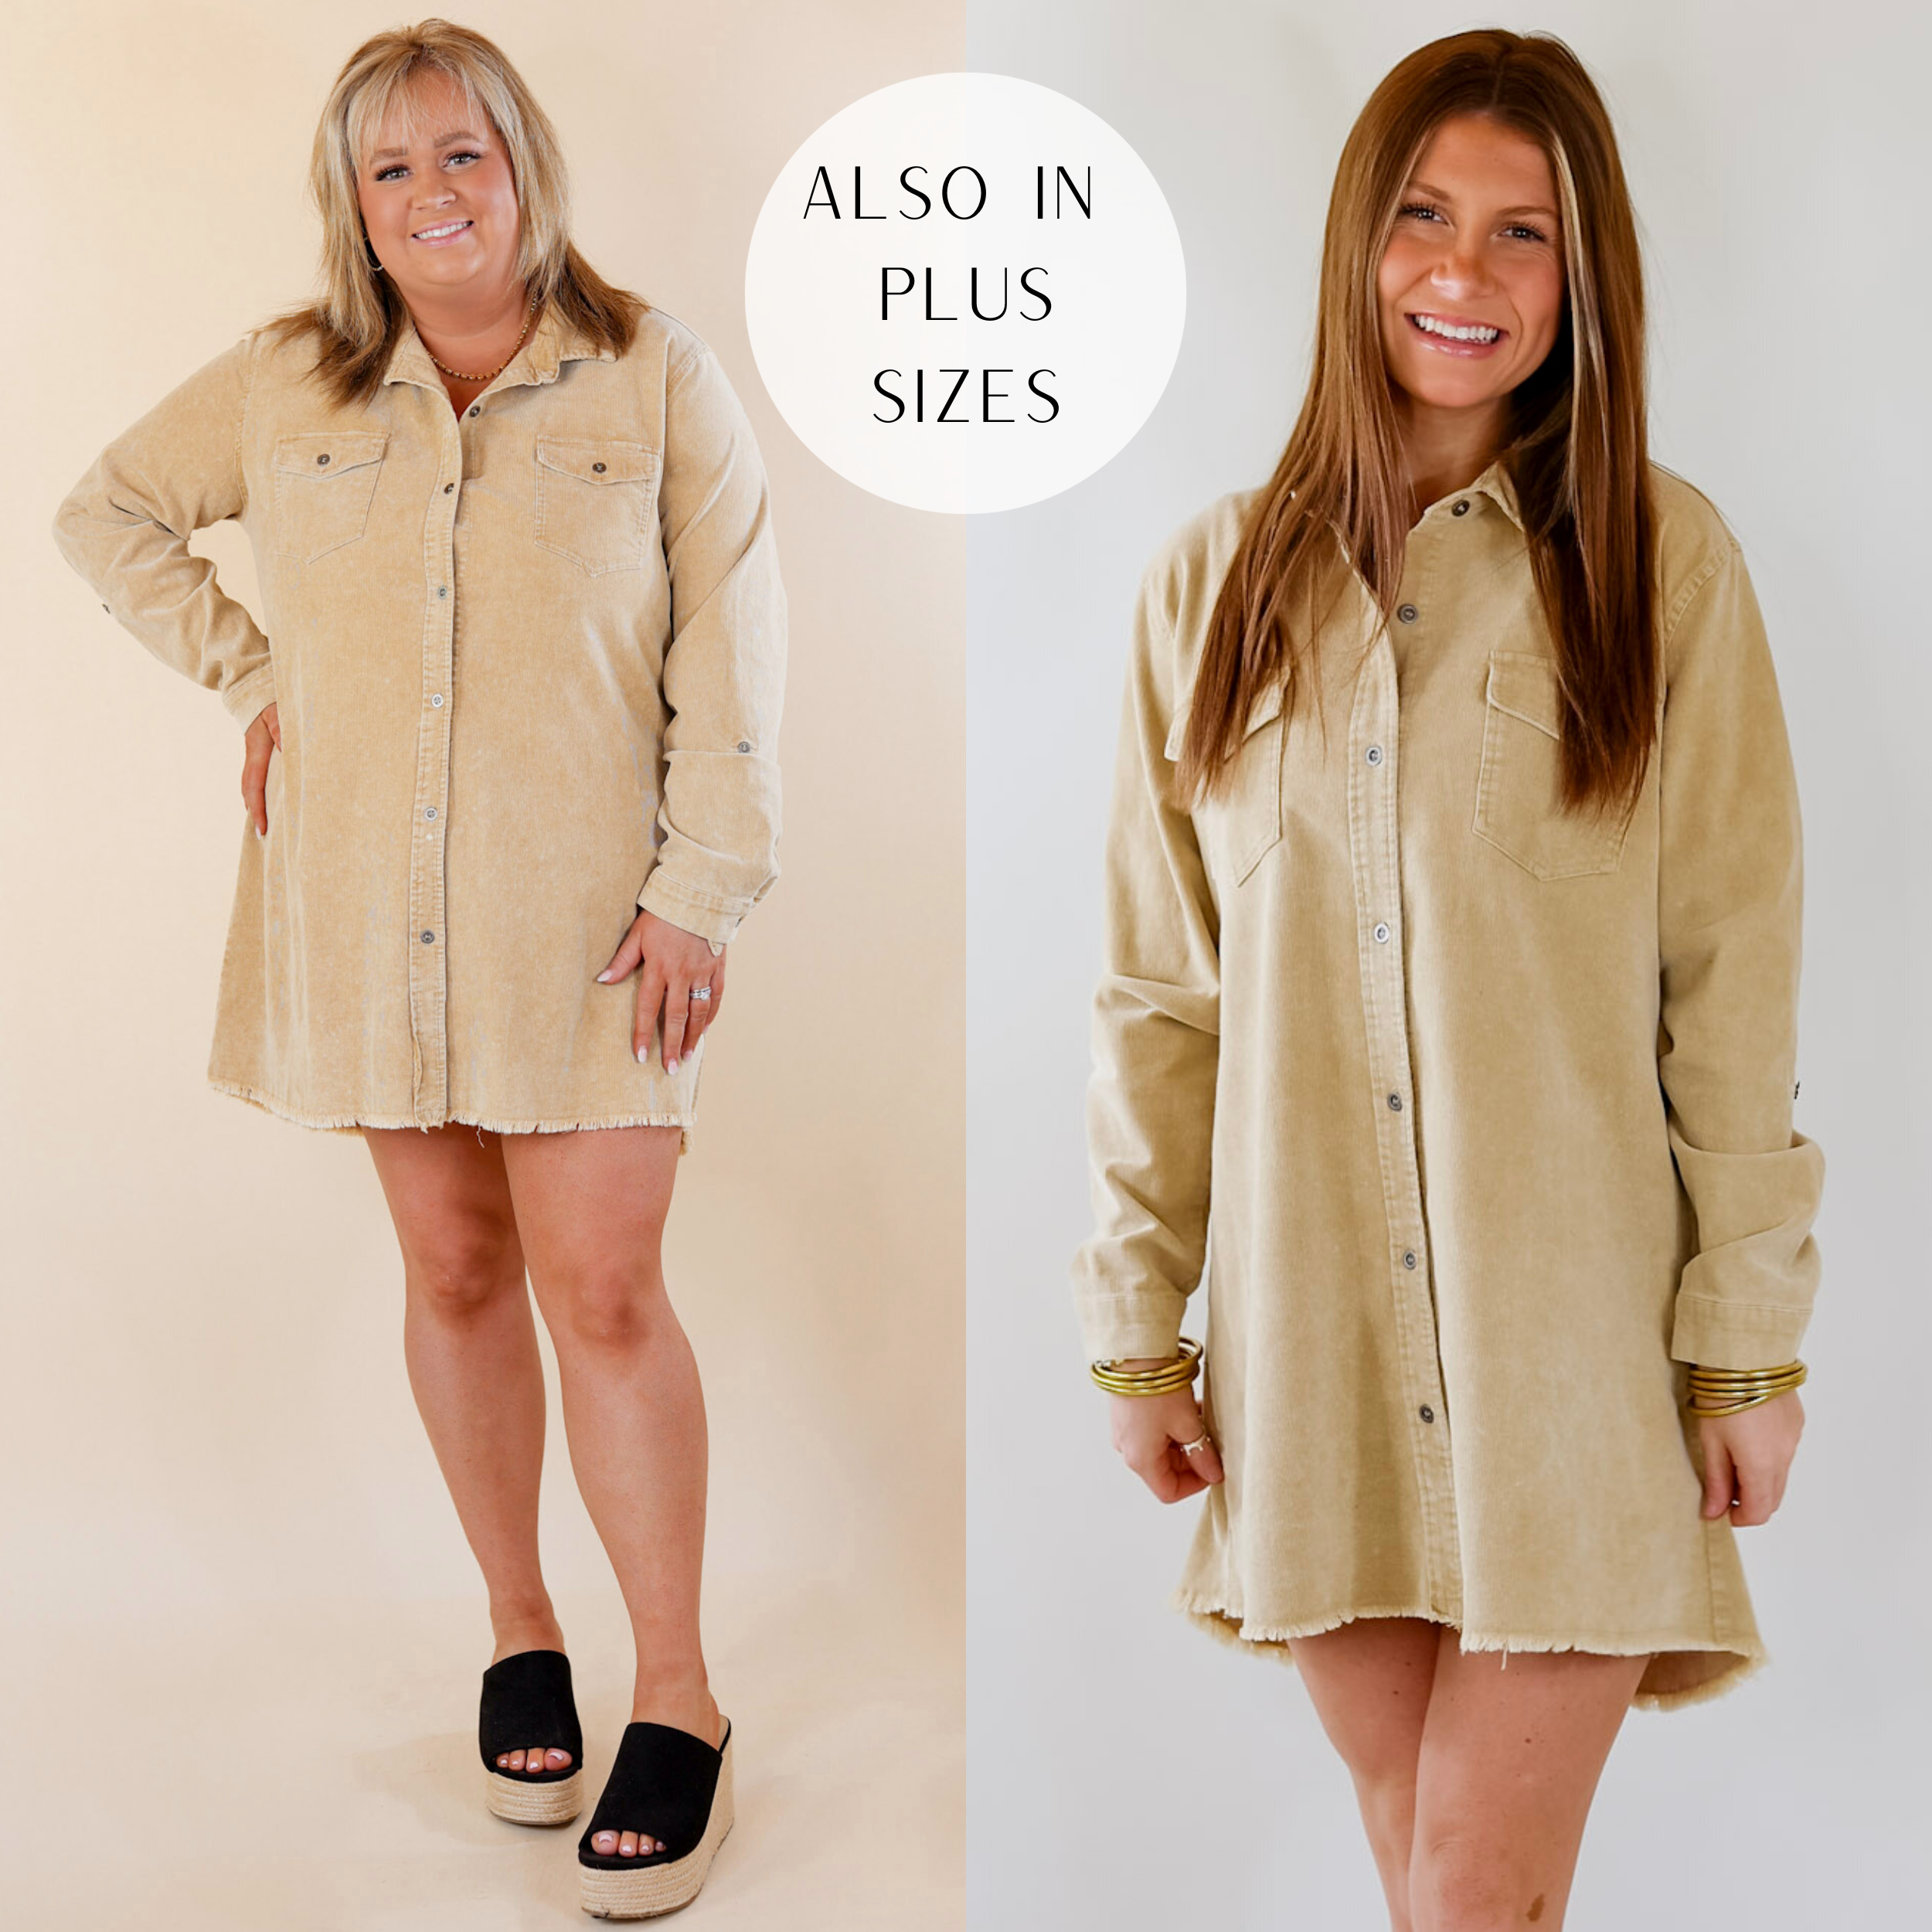 In the picture the model is wearing is wearing a button up long sleeve corduroy dress in tan with a white background